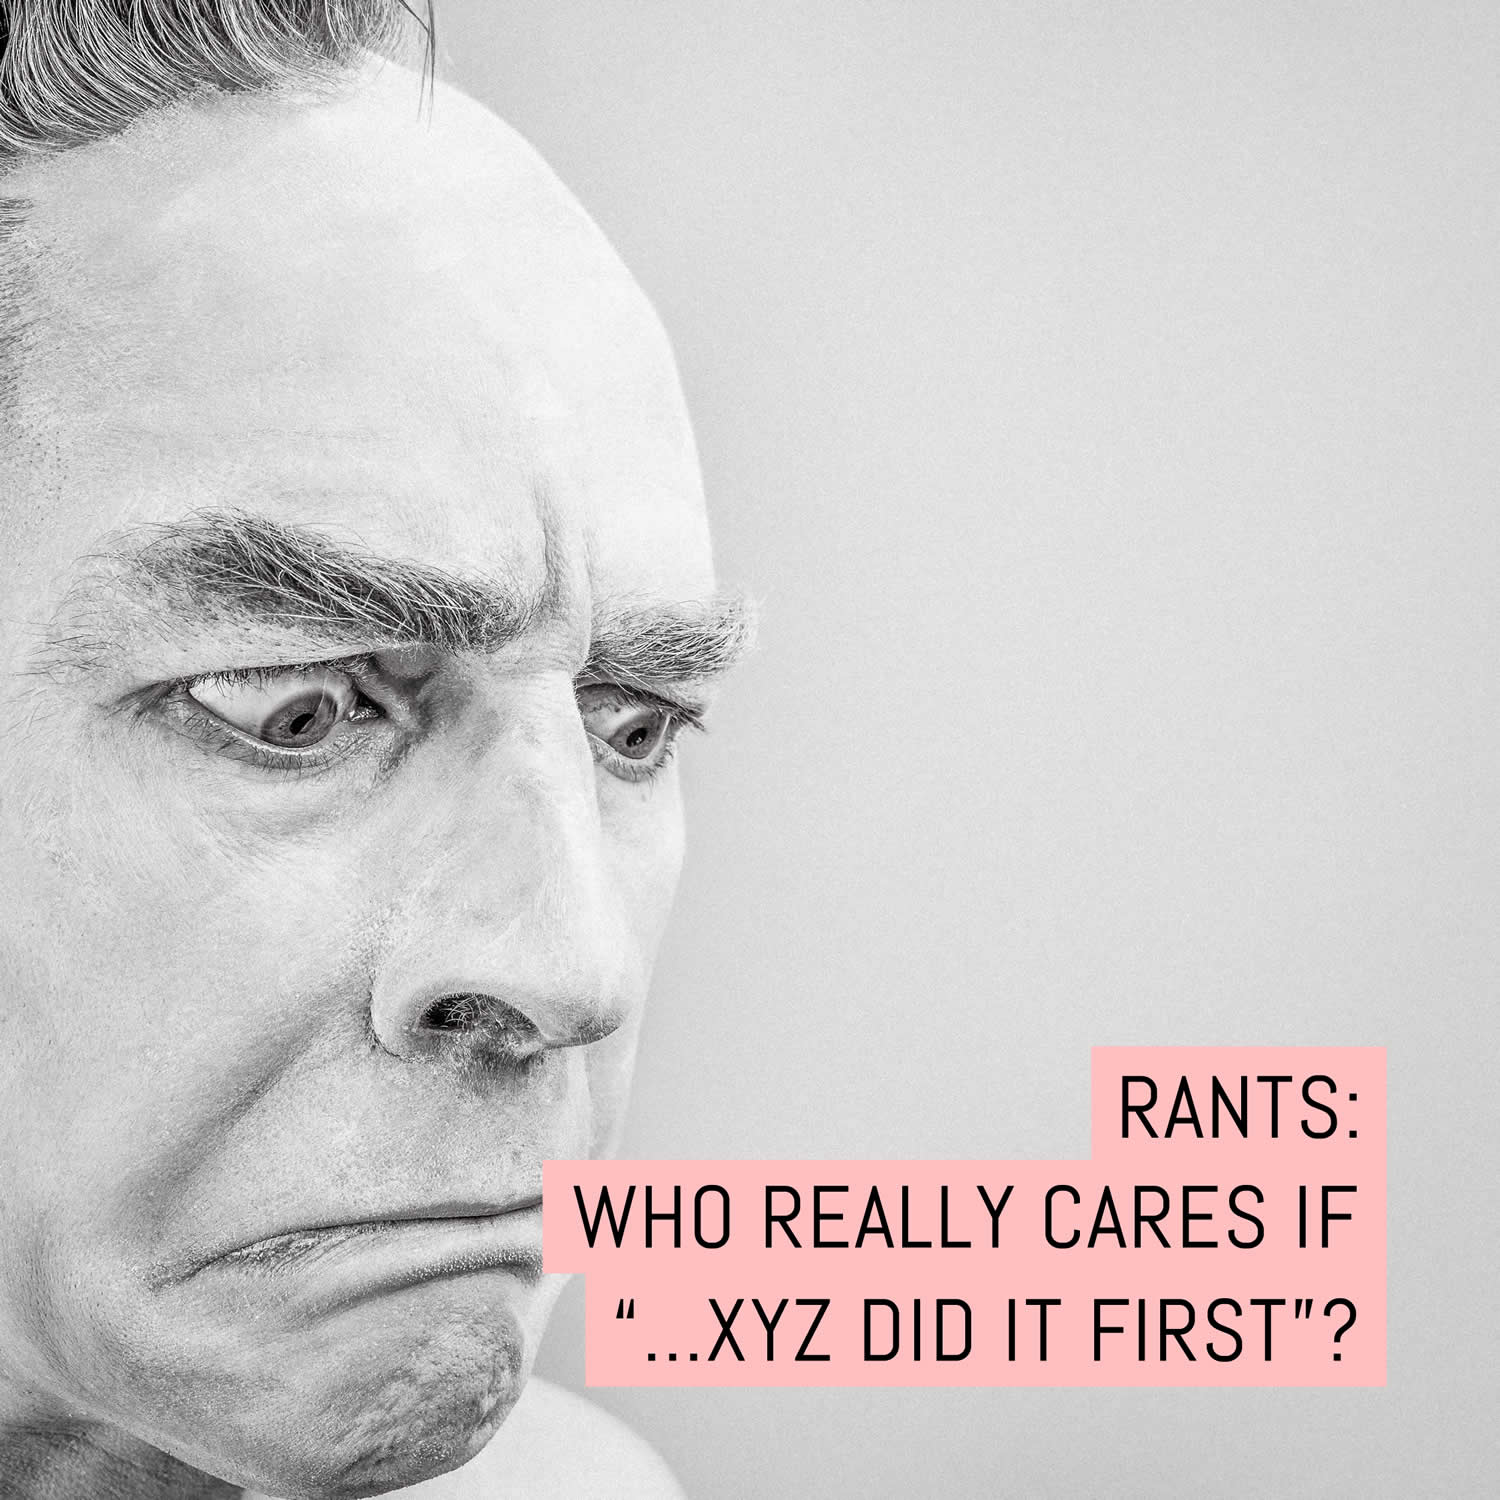 Who really cares if …”XYZ did it first”?